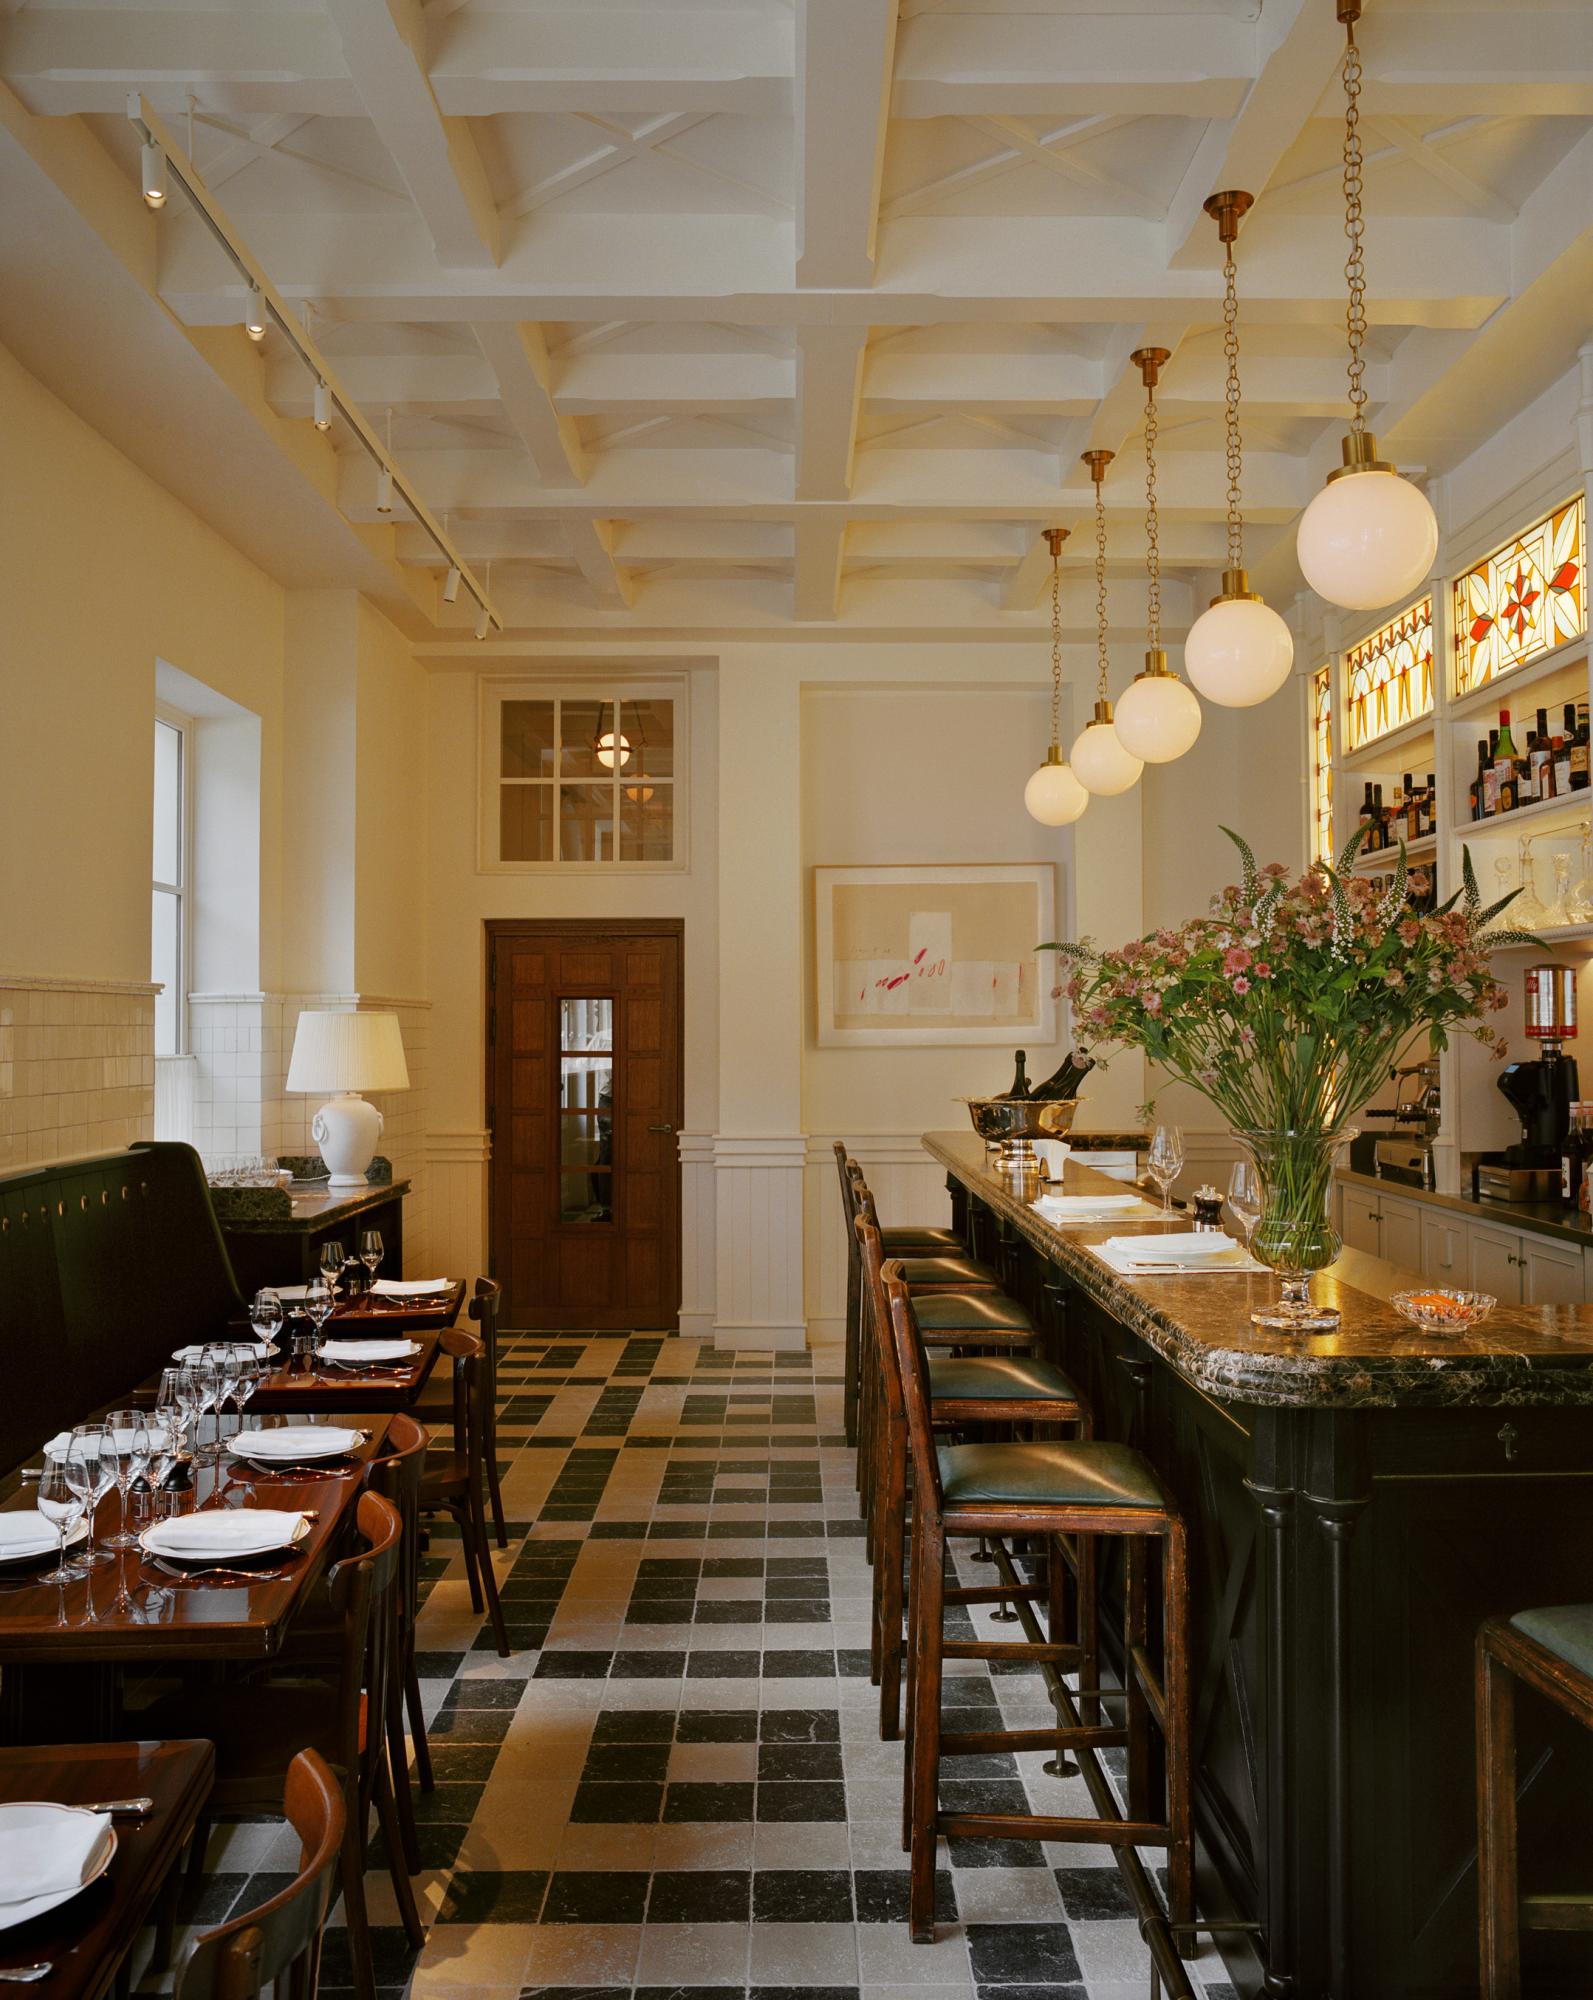 The cozy interiors of Brasserie Emil at Chateau Voltaire with green-leather bar stools, classic banquette seating along the walls and an Art Deco inspired floor made up of black and white stone